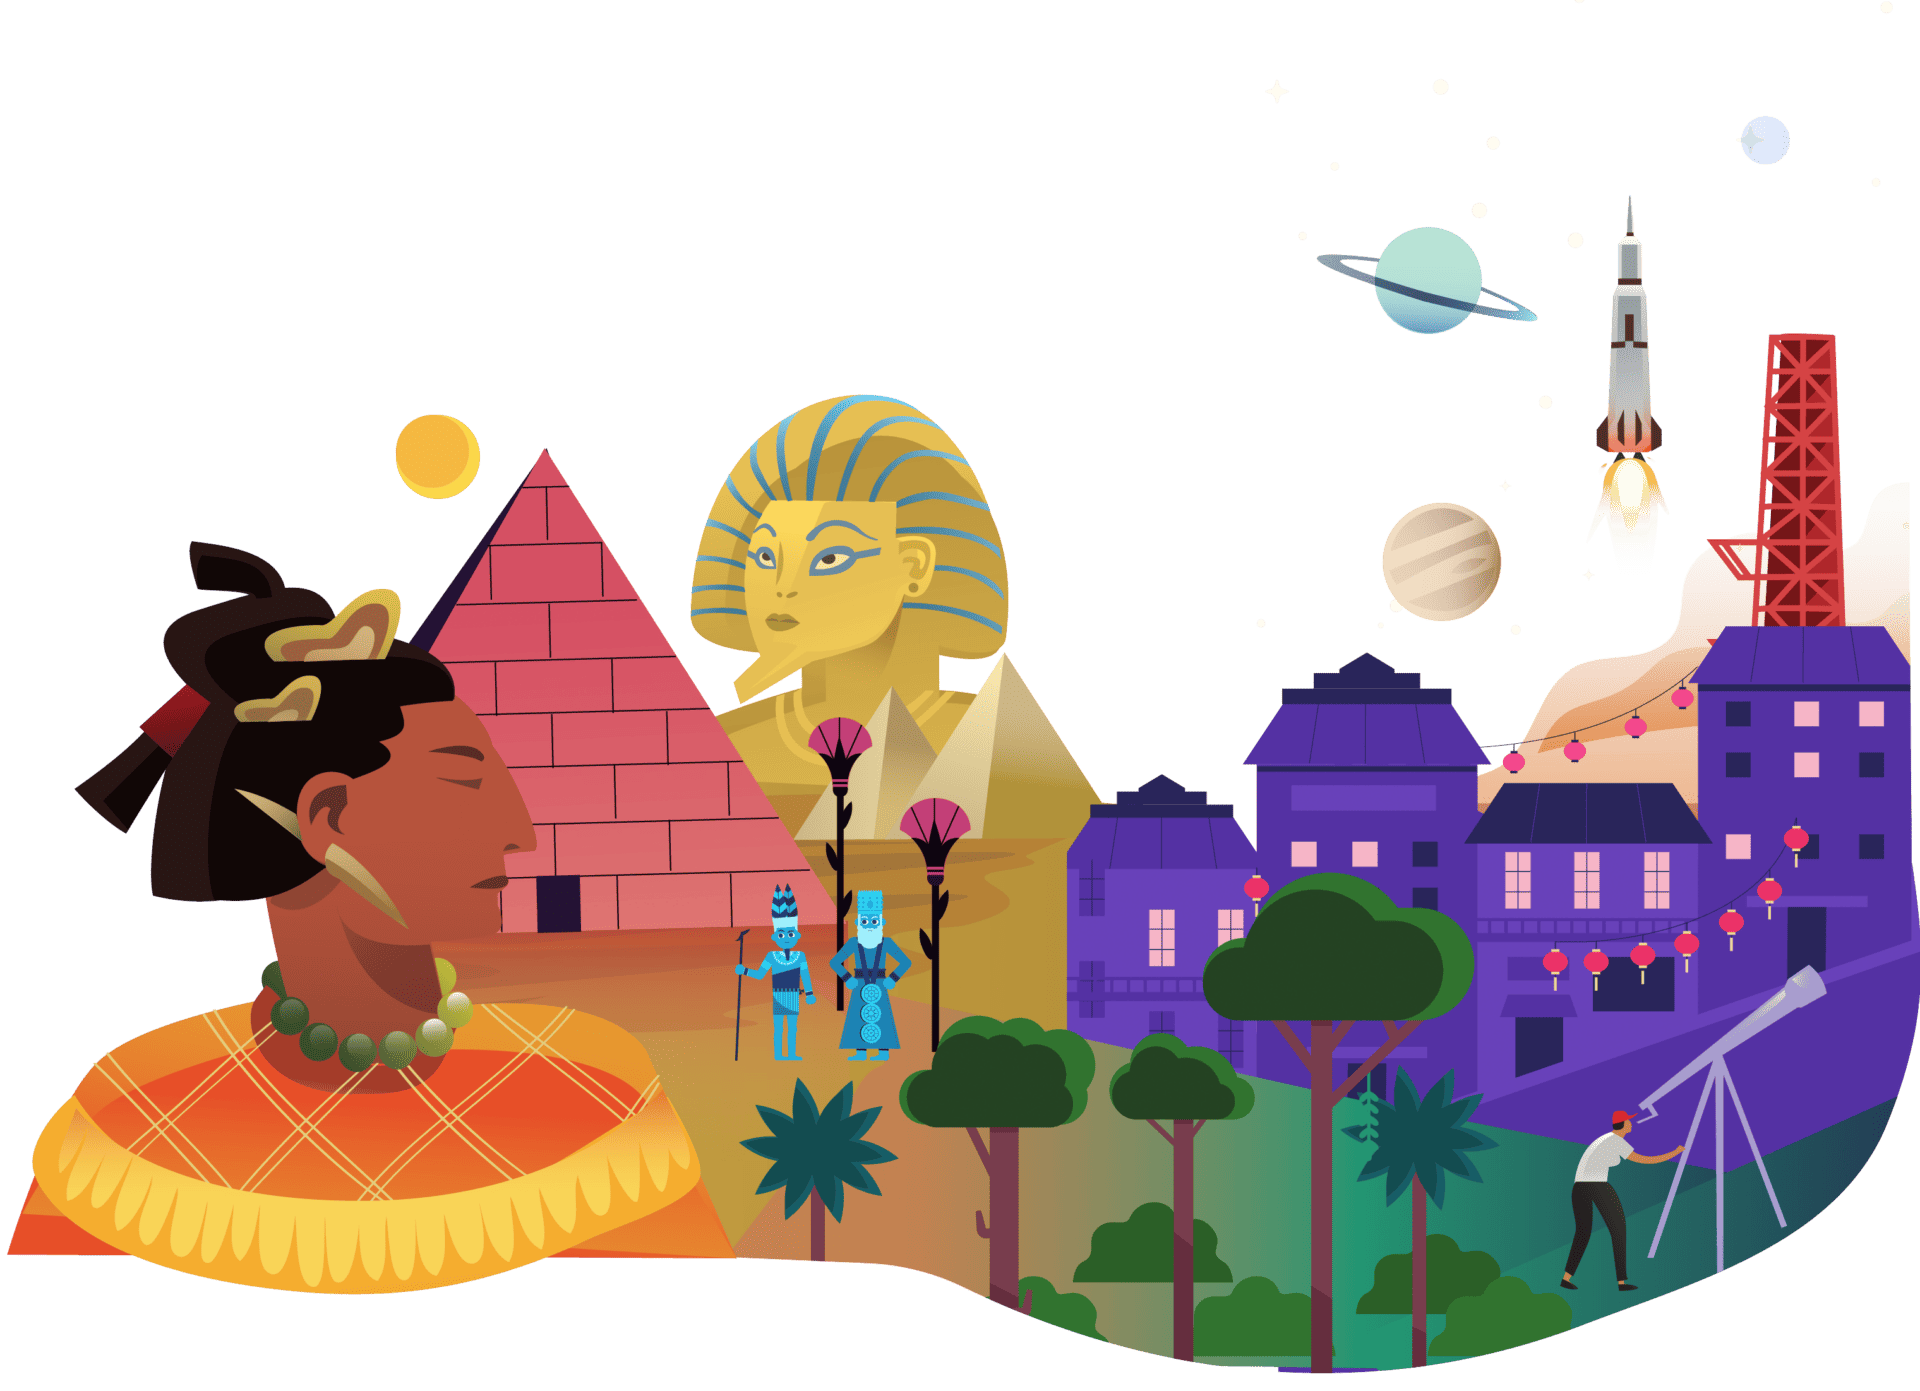 Illustration featuring diverse cultural and historical elements like an african woman, an egyptian sphinx, a space rocket, and urban and natural landscapes under a starry sky.